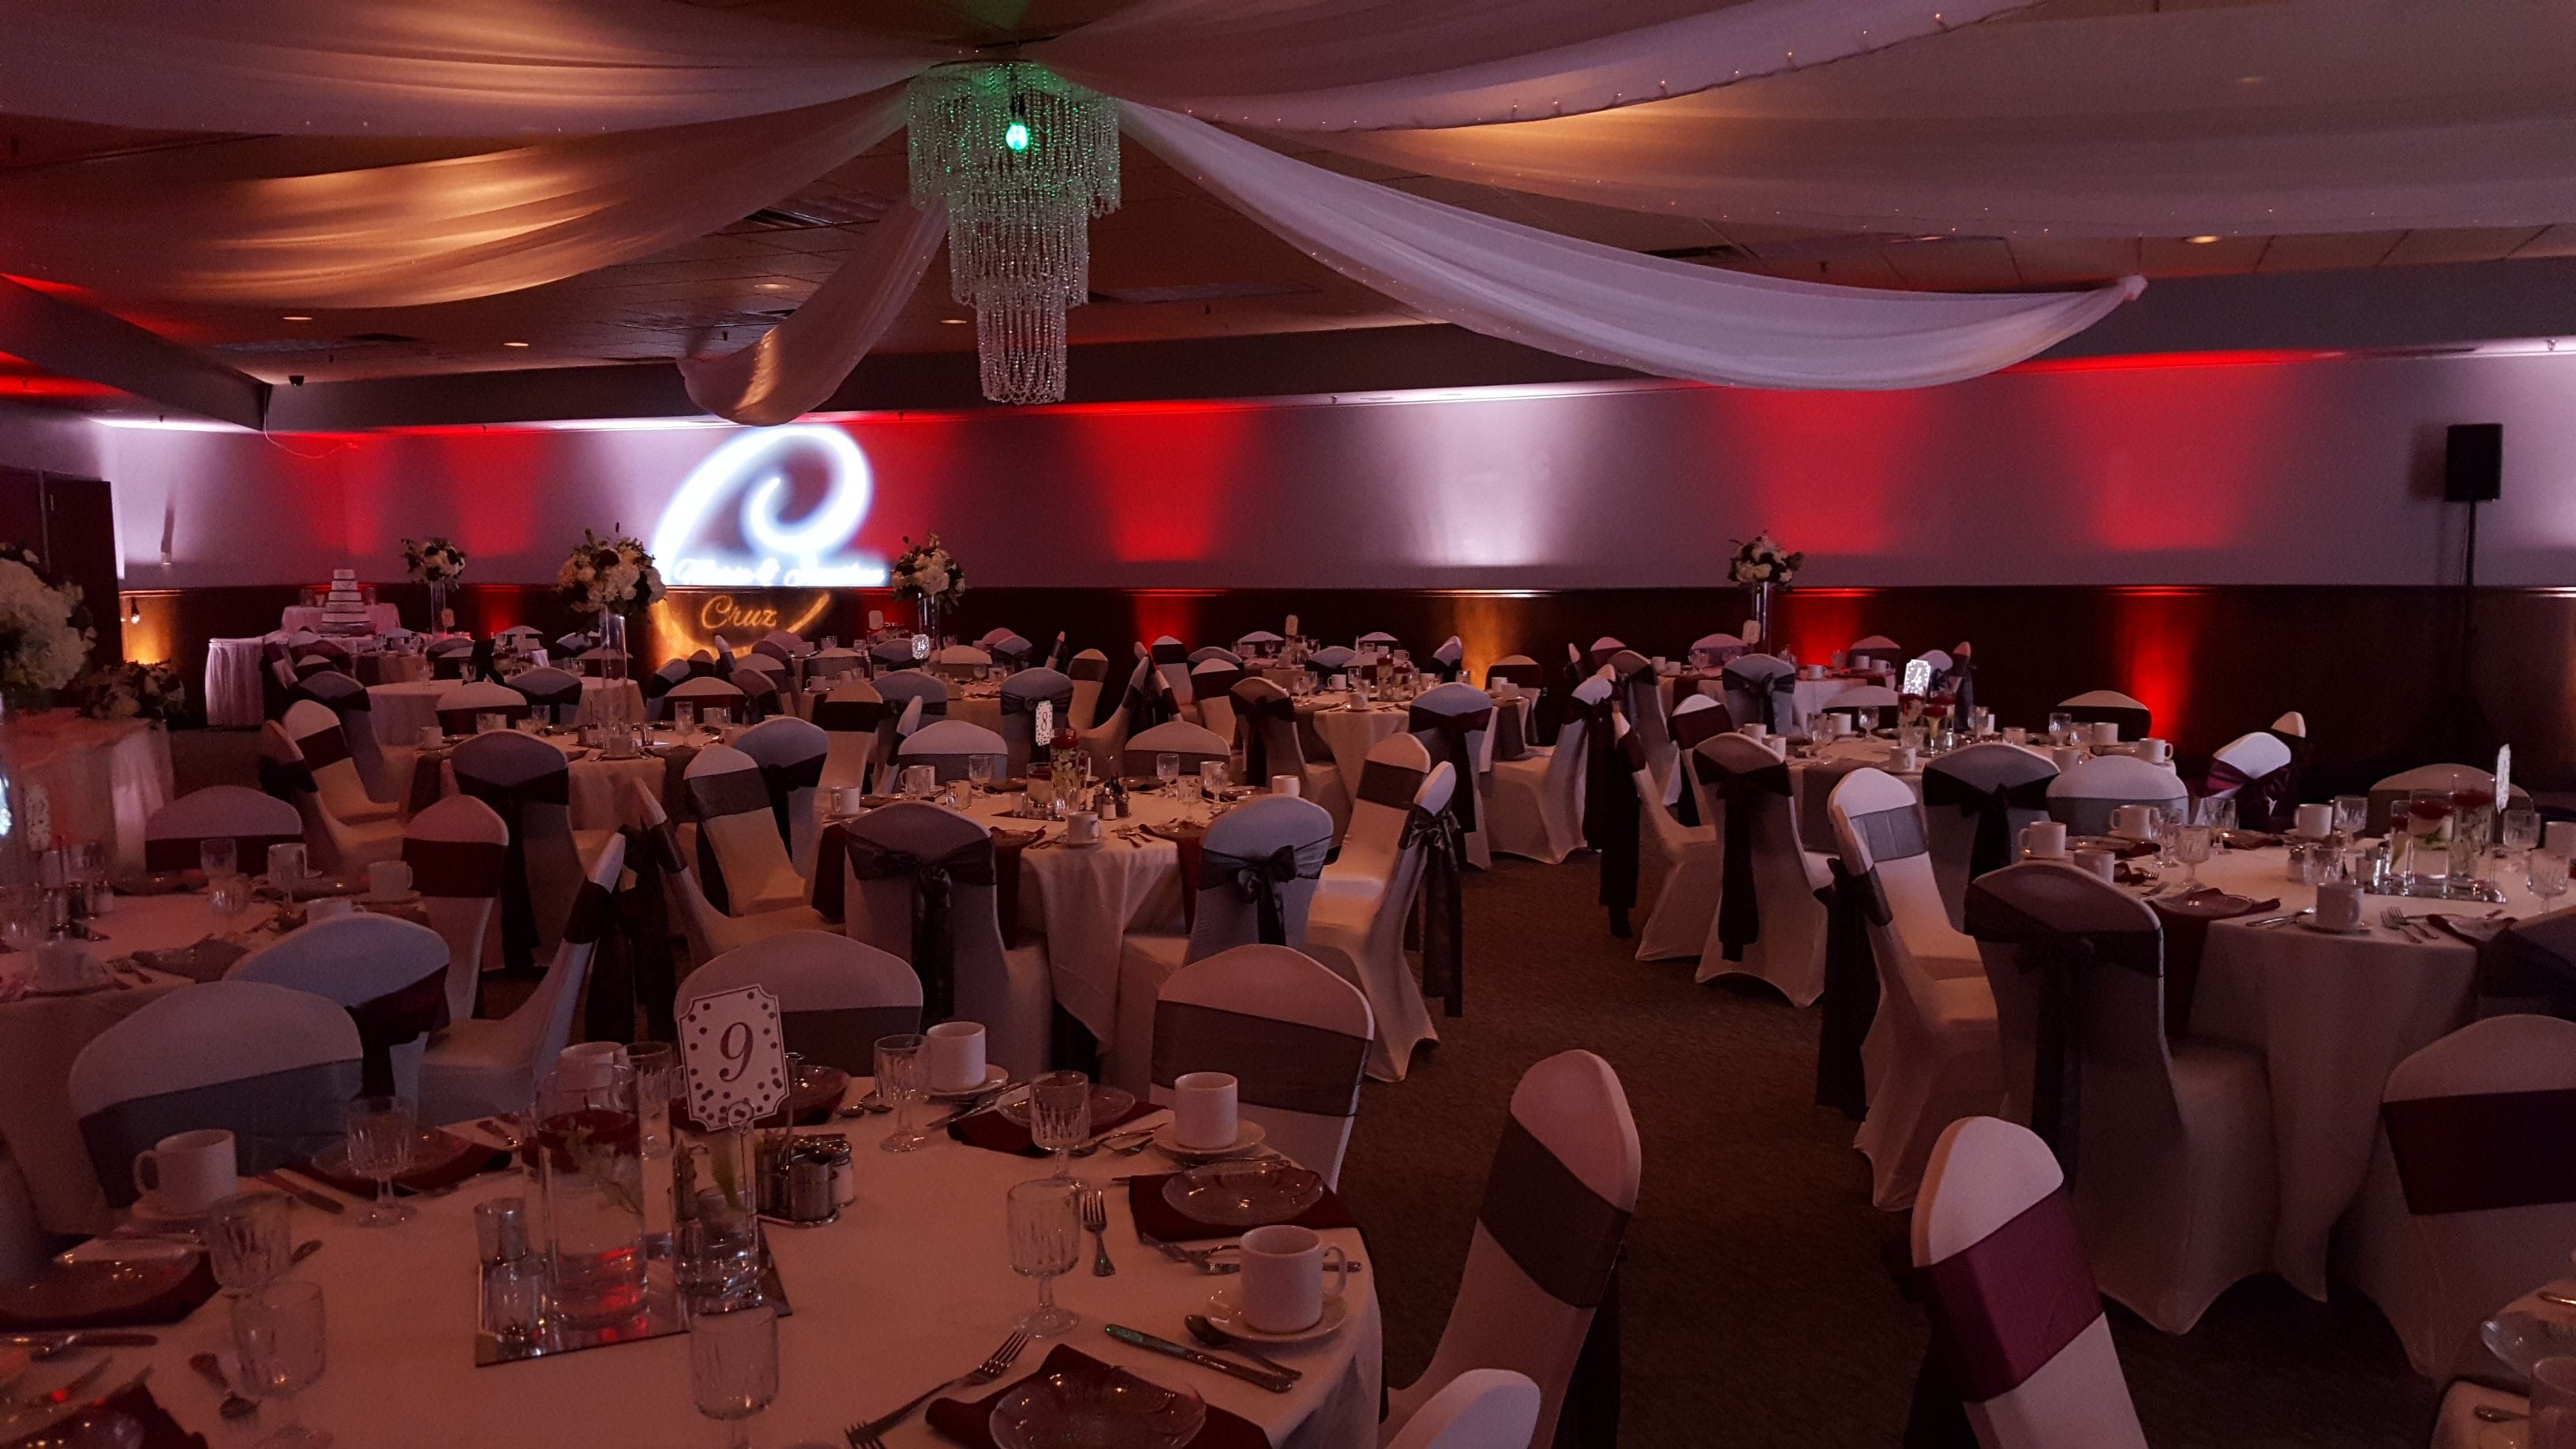 Wedding at Blackwoods Proctor. Up lighting in red and white with a monogram.